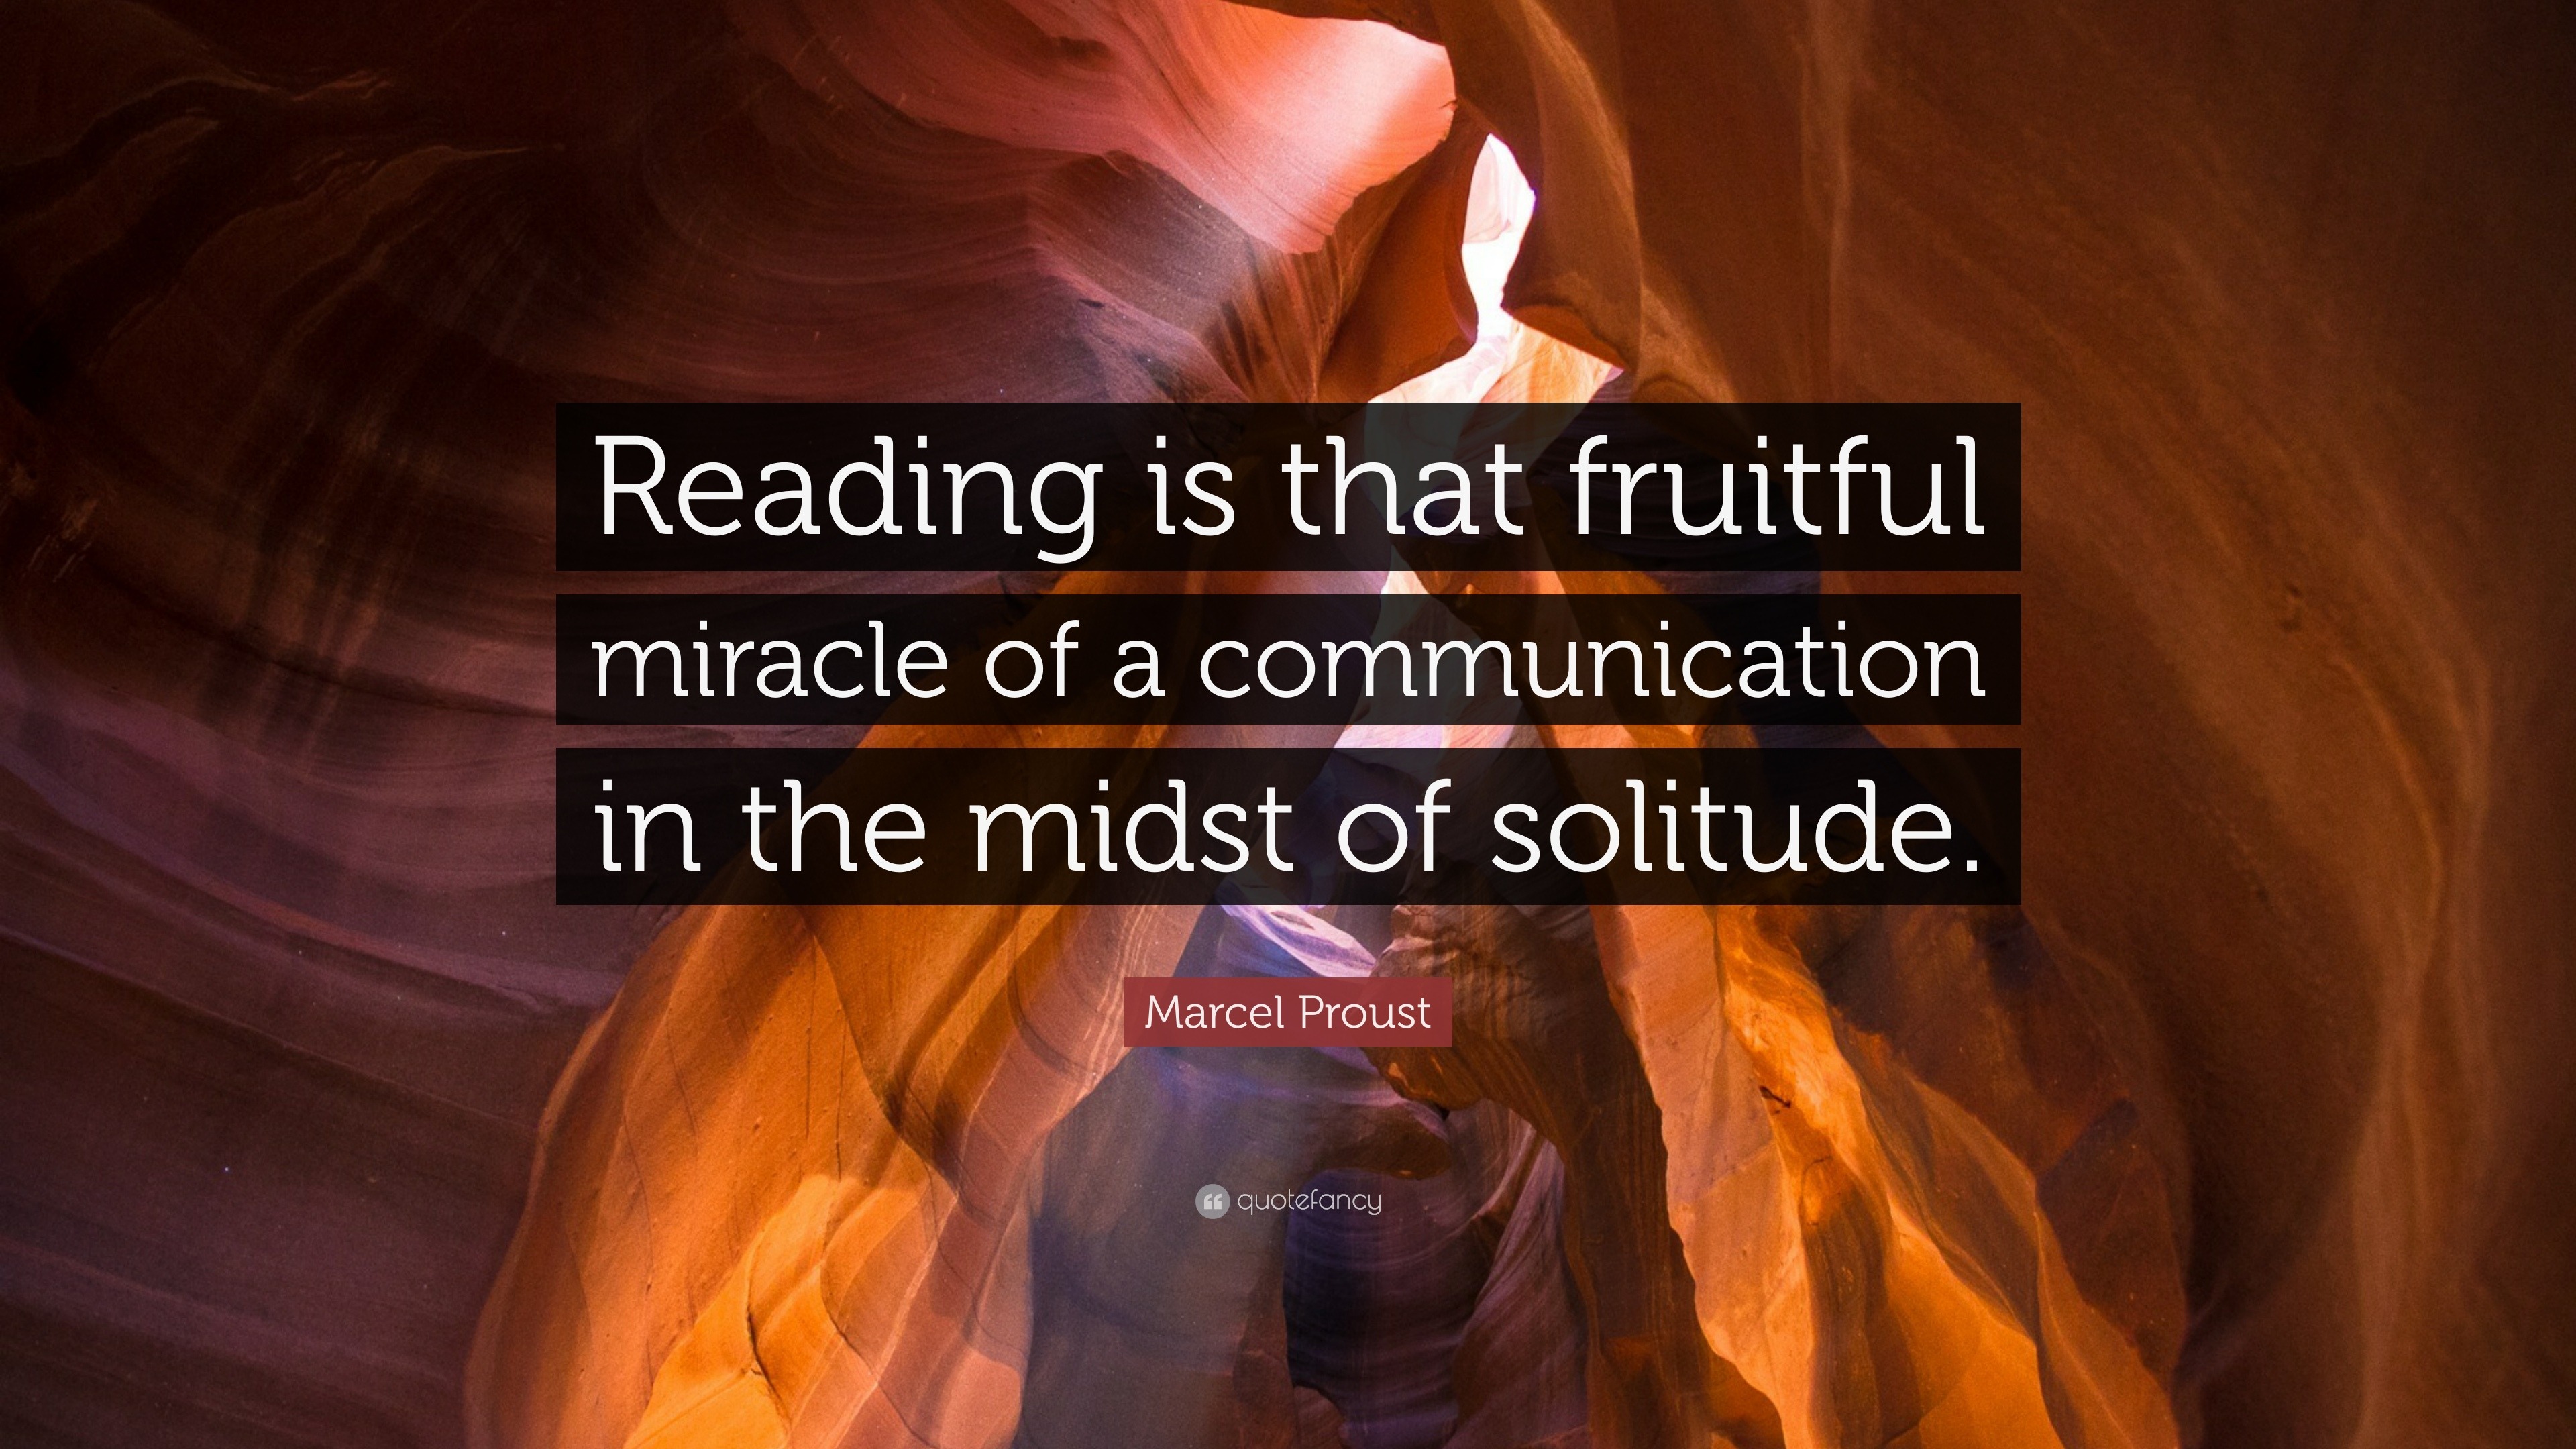 Marcel Proust Quote: “Reading is that fruitful miracle of a ...